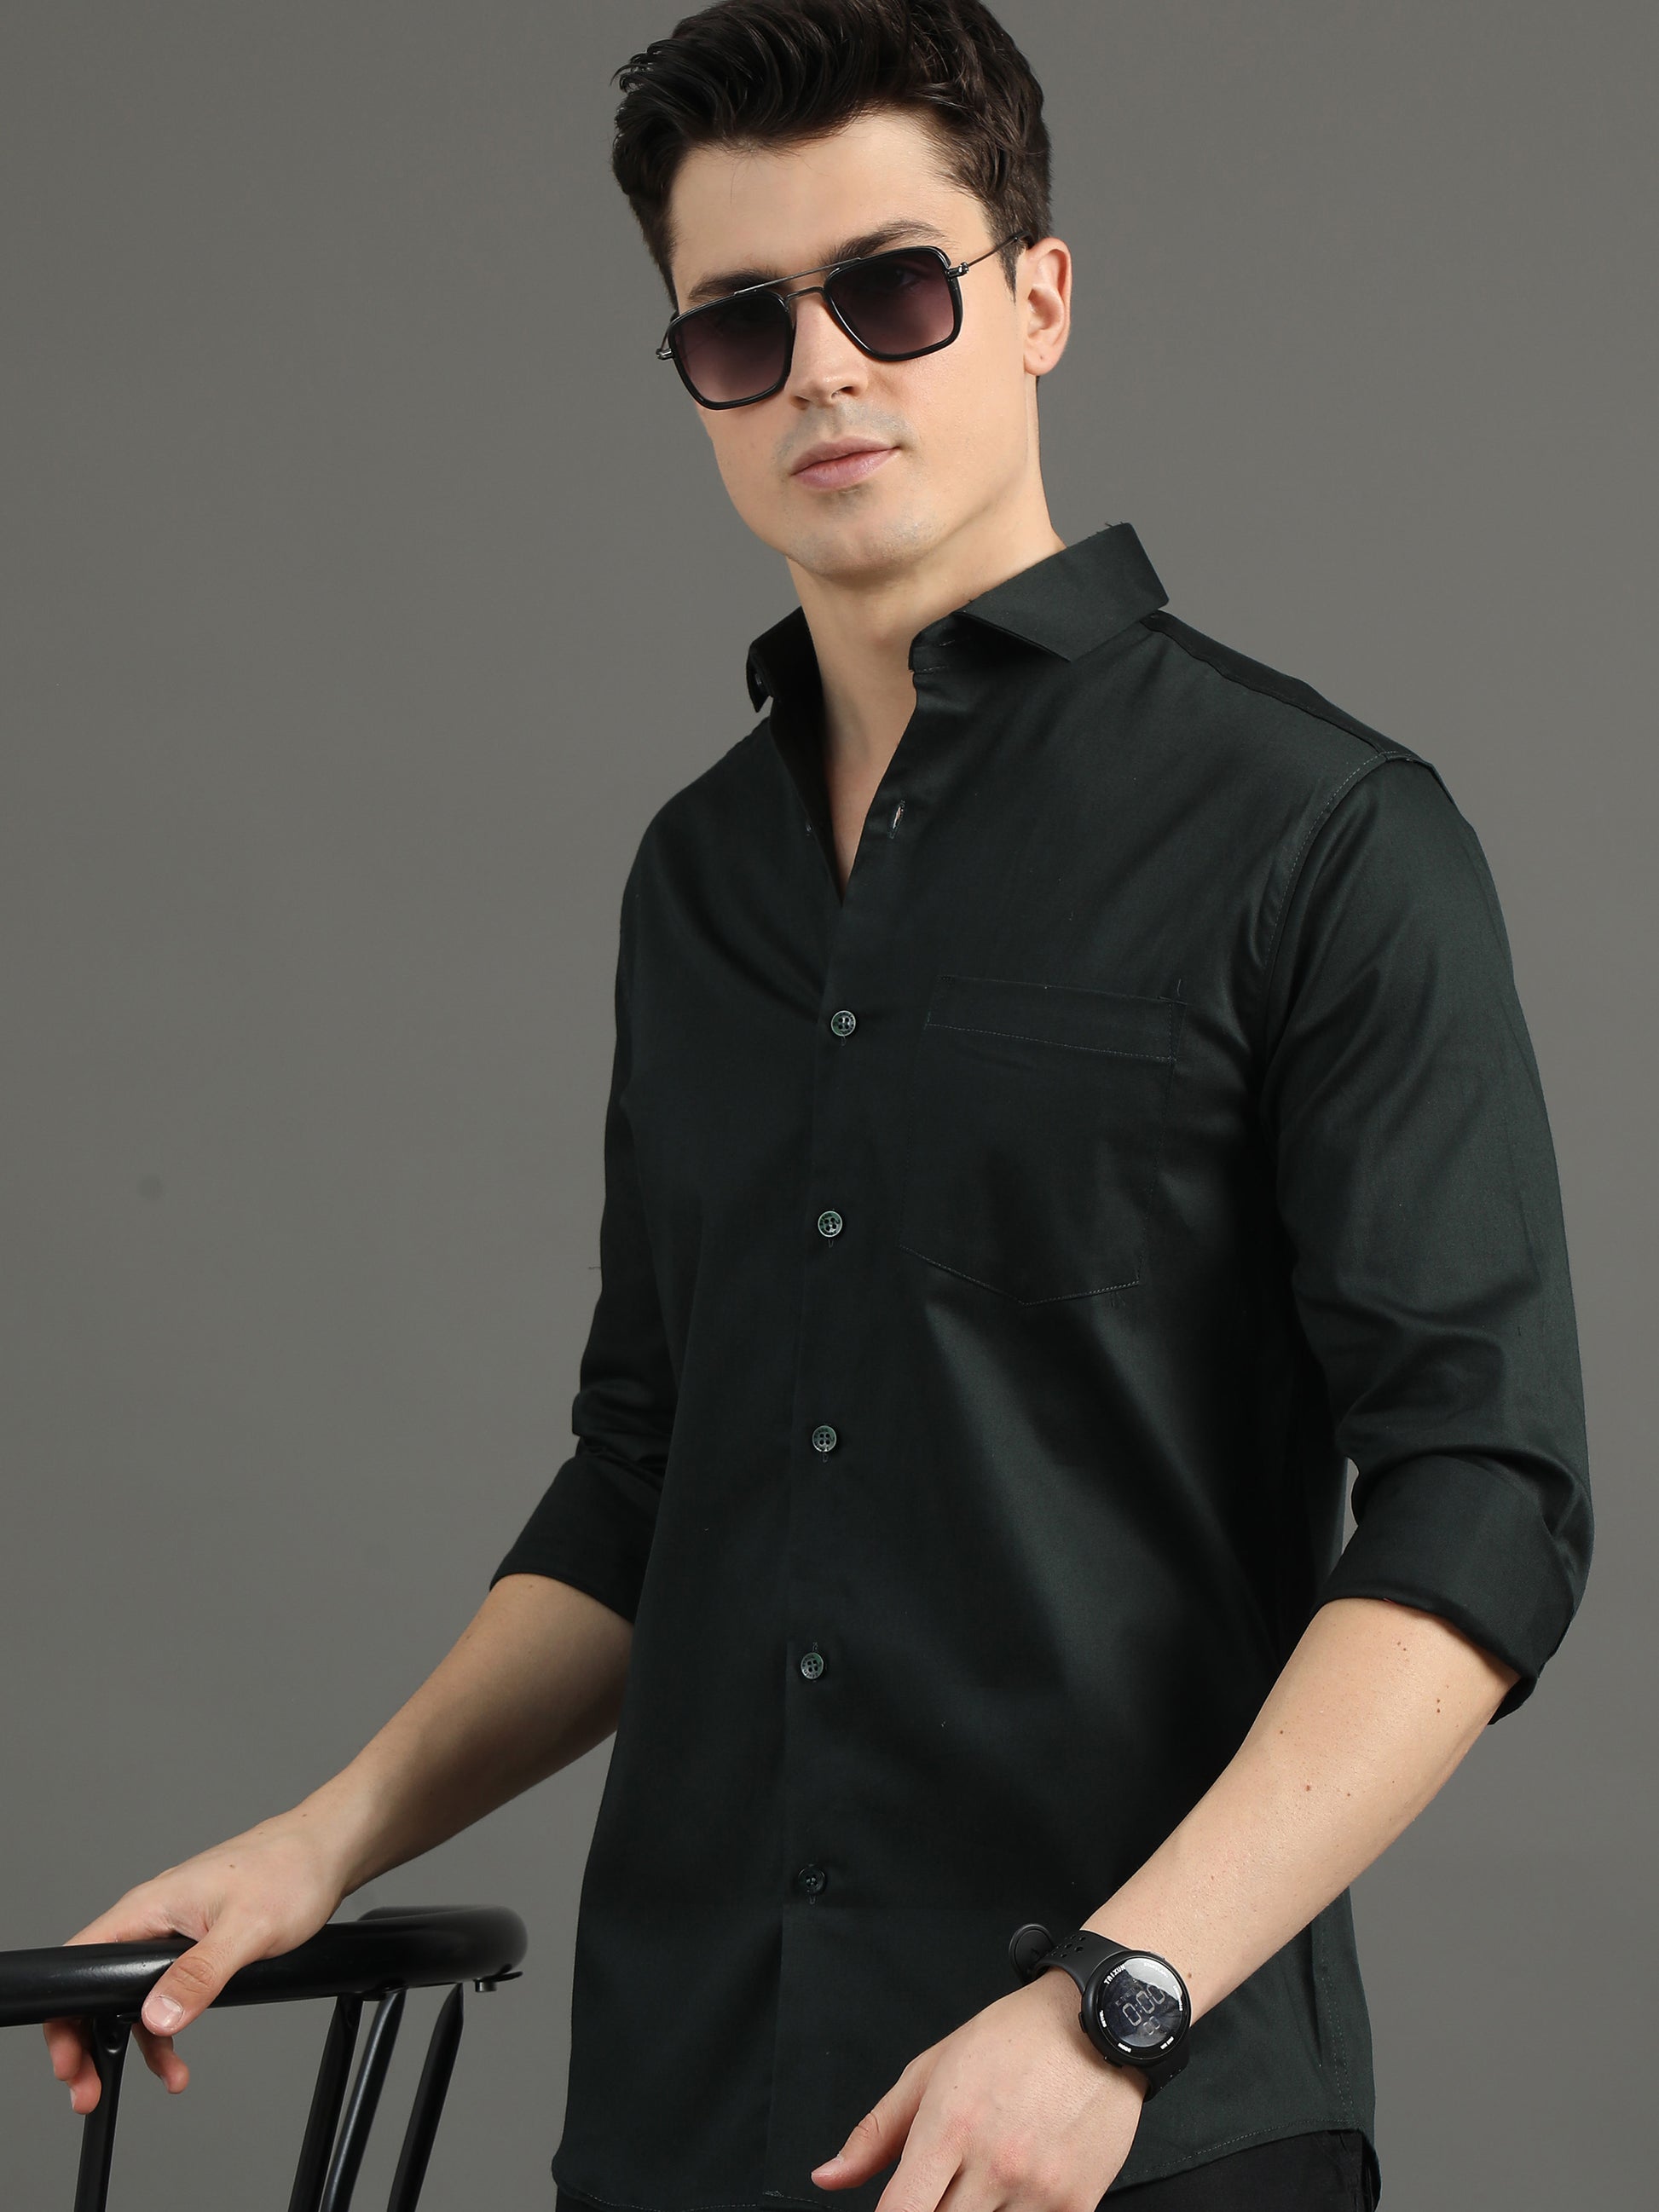 2Dudes Solid Black Full Sleeves Round Neck Cotton Shirt